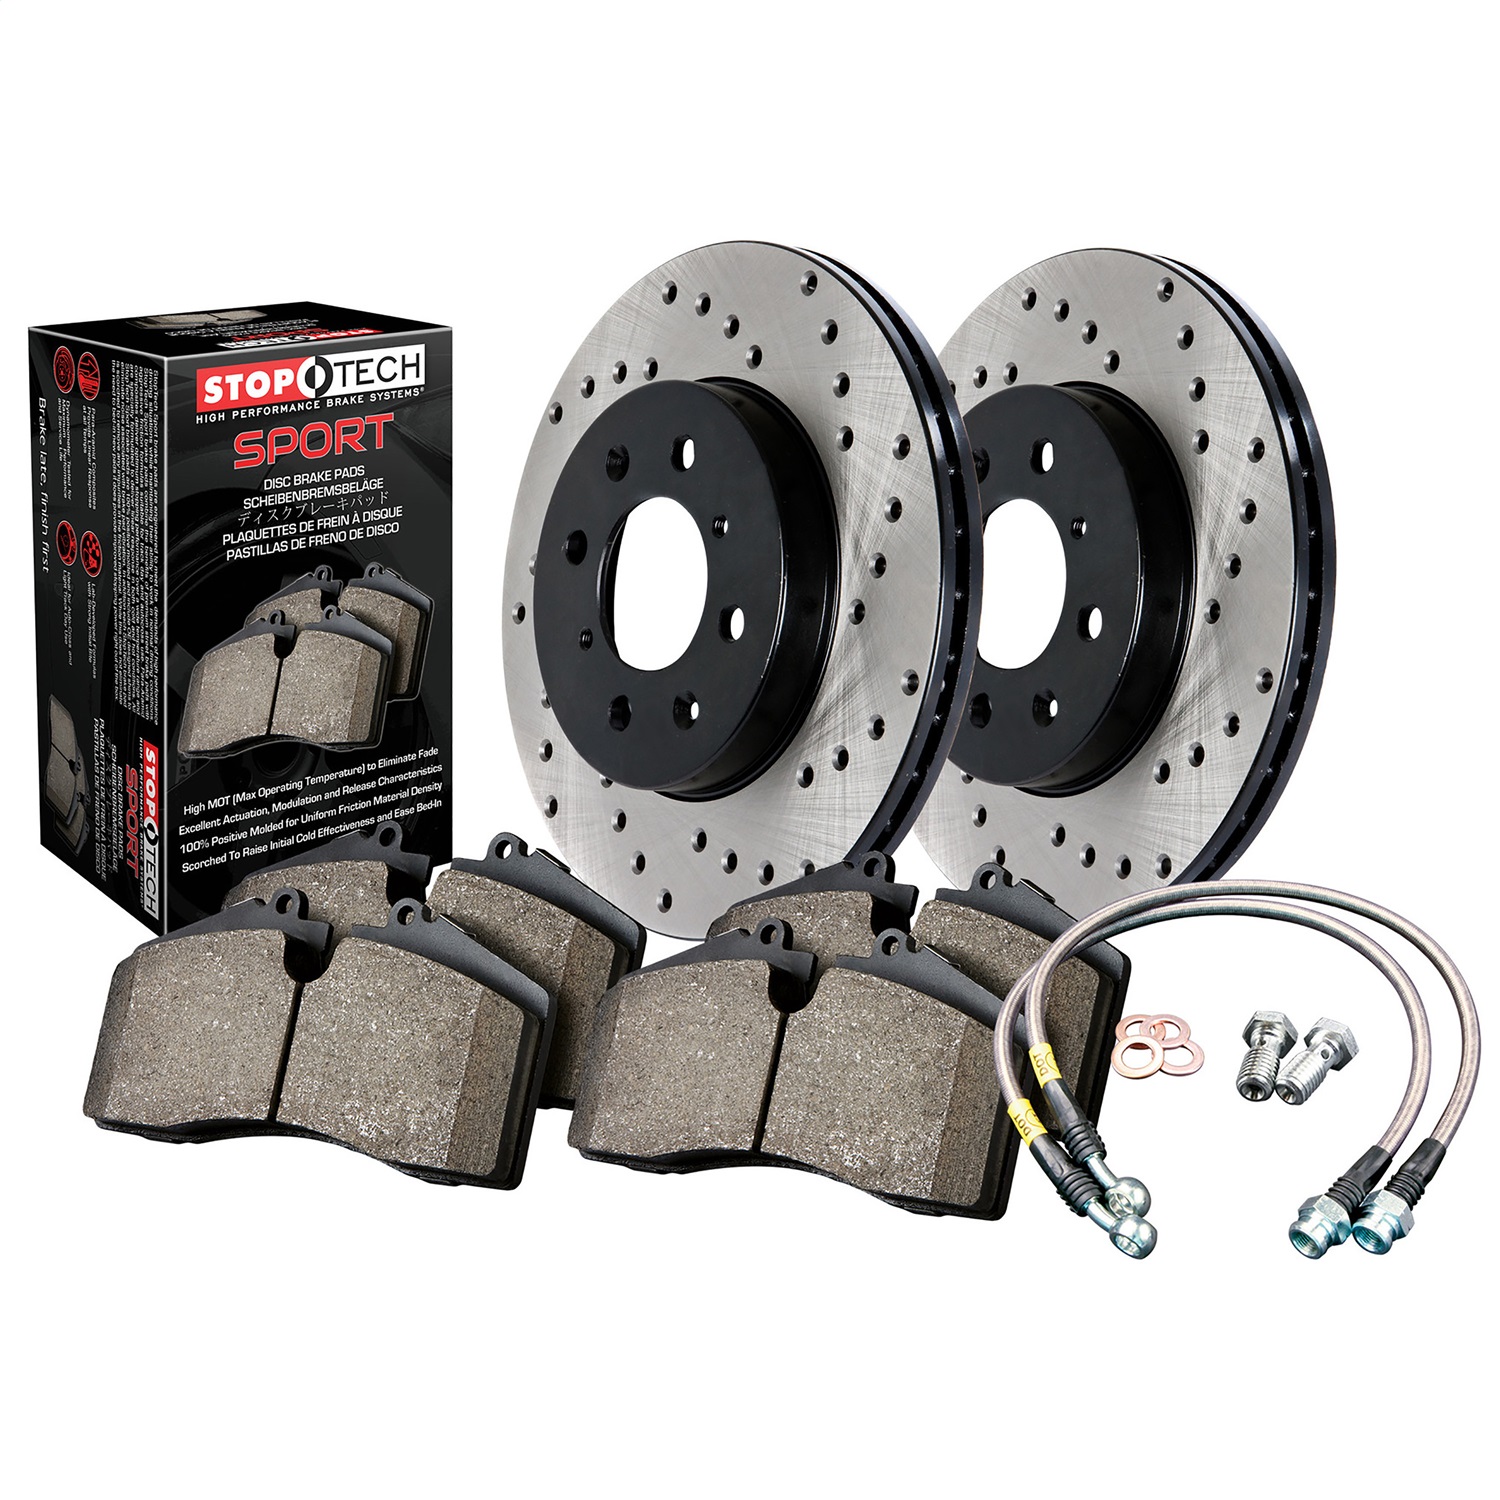 StopTech 979.33019R Sport Disc Brake Kit w/Cross-Drilled Rotors Fits 08-15 S4 S5